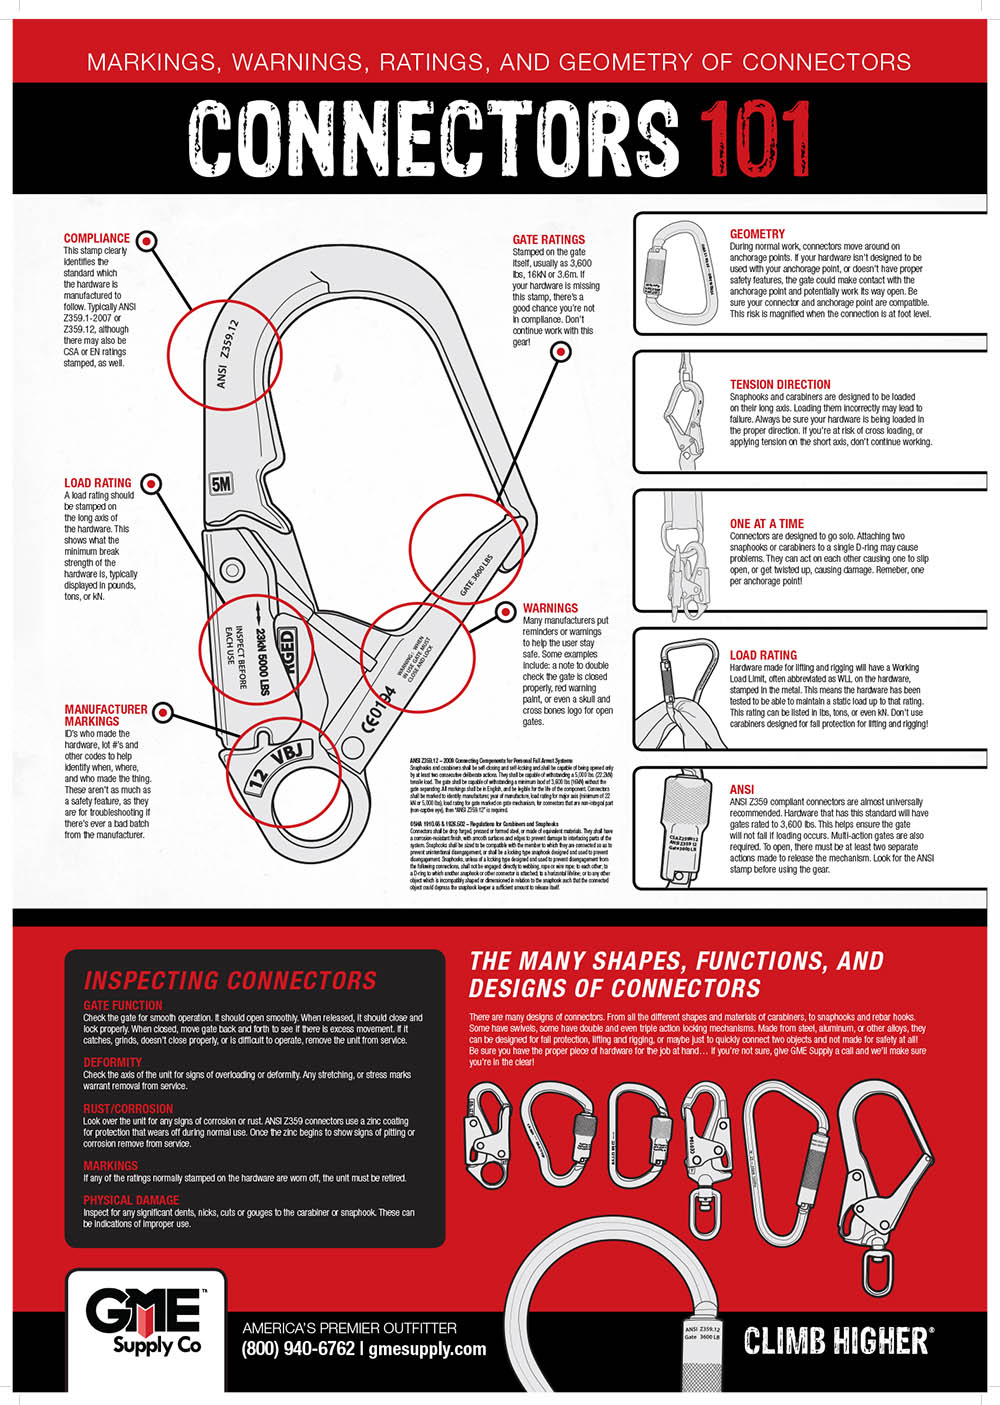 Connectors 101 Safety Poster from Columbia Safety